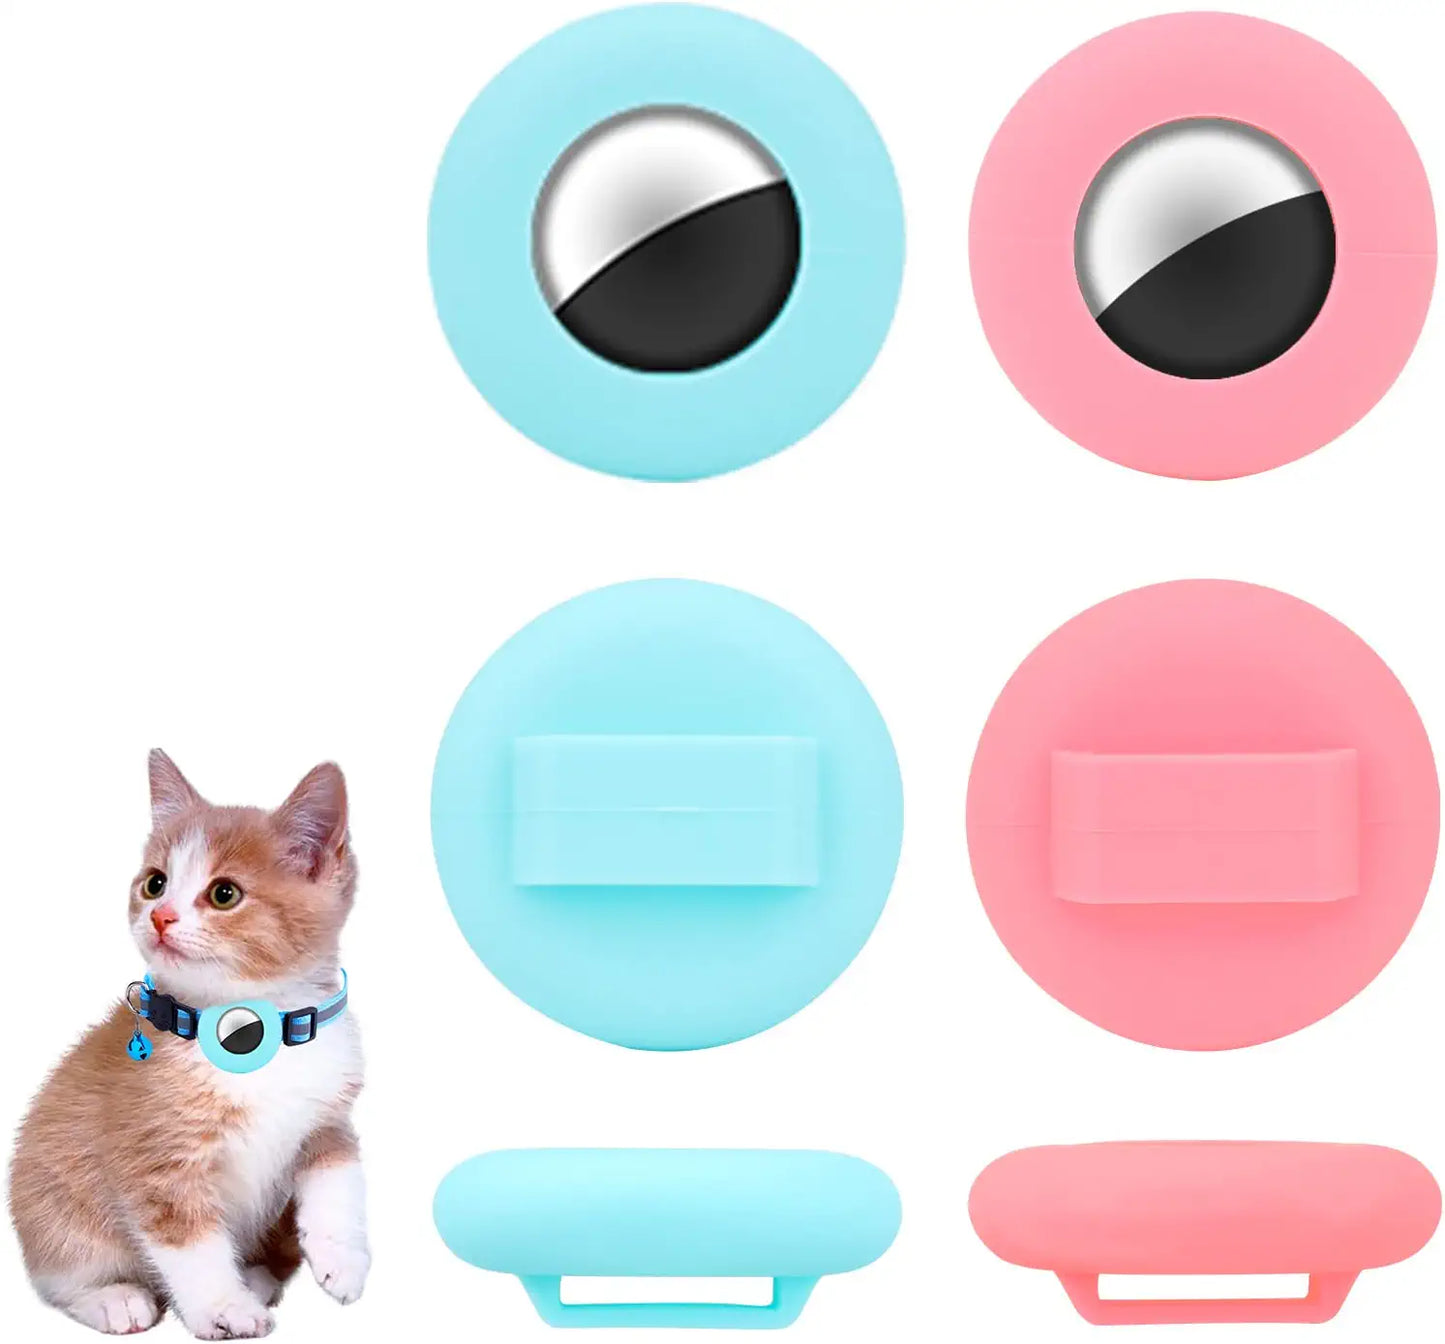 TOYMIS 2 Pcs Pet Collar Holders Compatible with Airtag, Silicone Cat Collar Holder Dog Collar Holder 3/8" Collar Tag Holders for Pets Dog Cat Children Elderly Bags